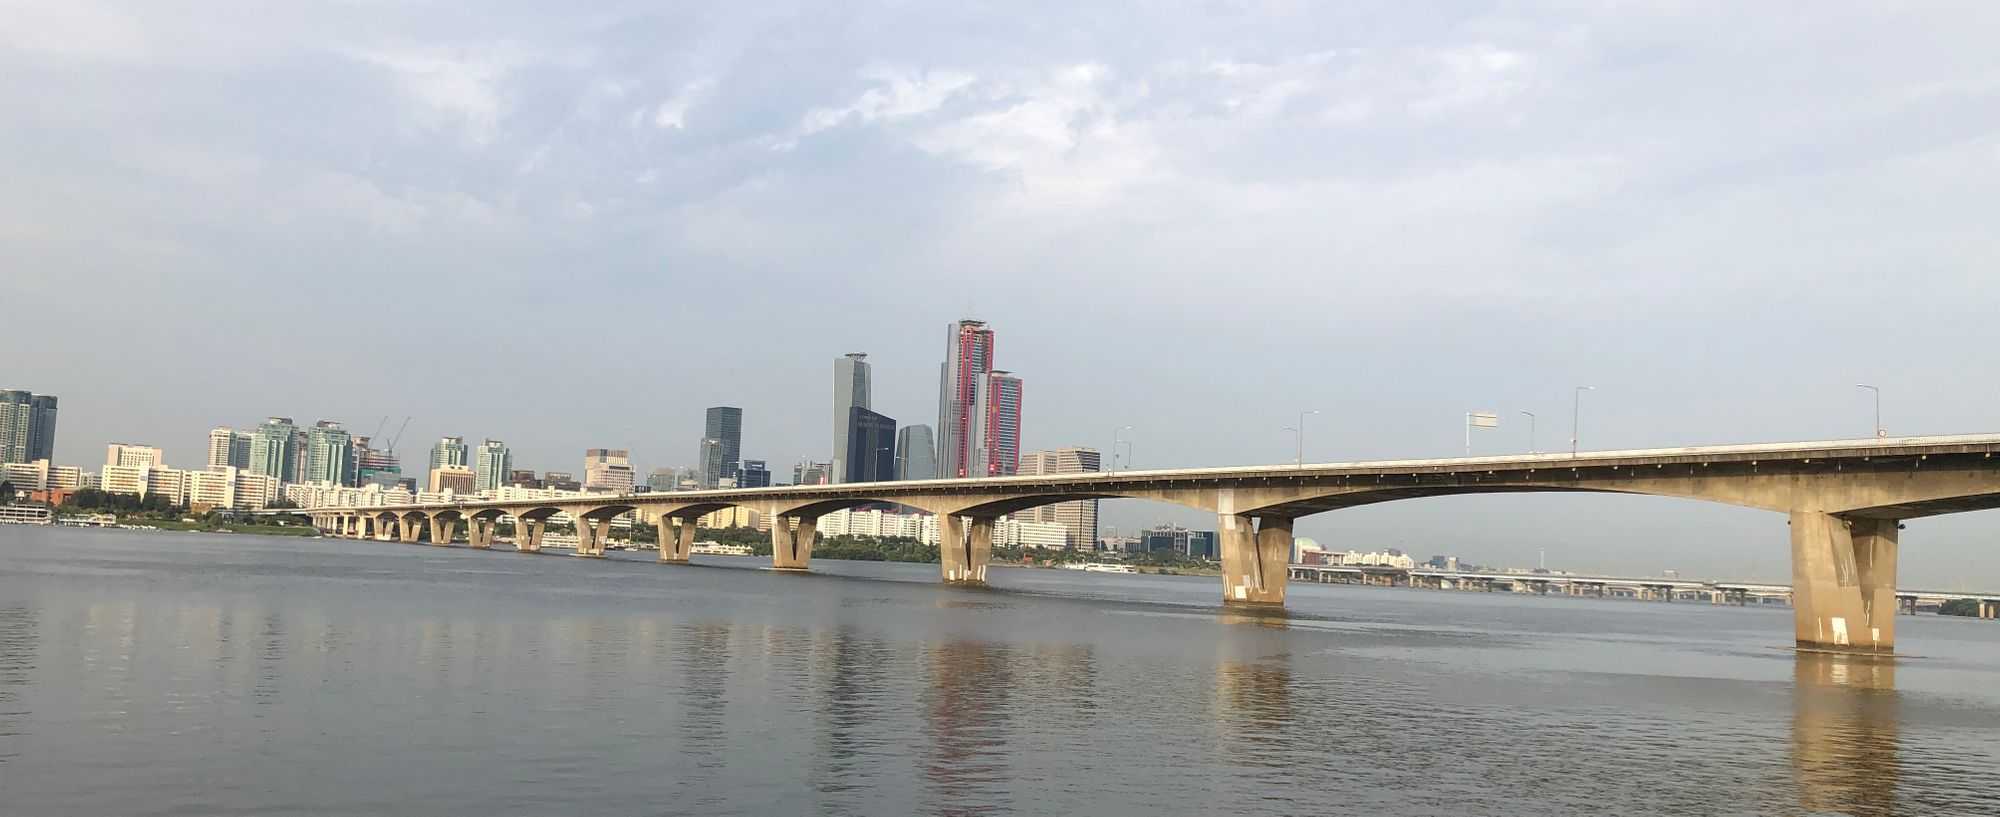 Han River (Image by author)